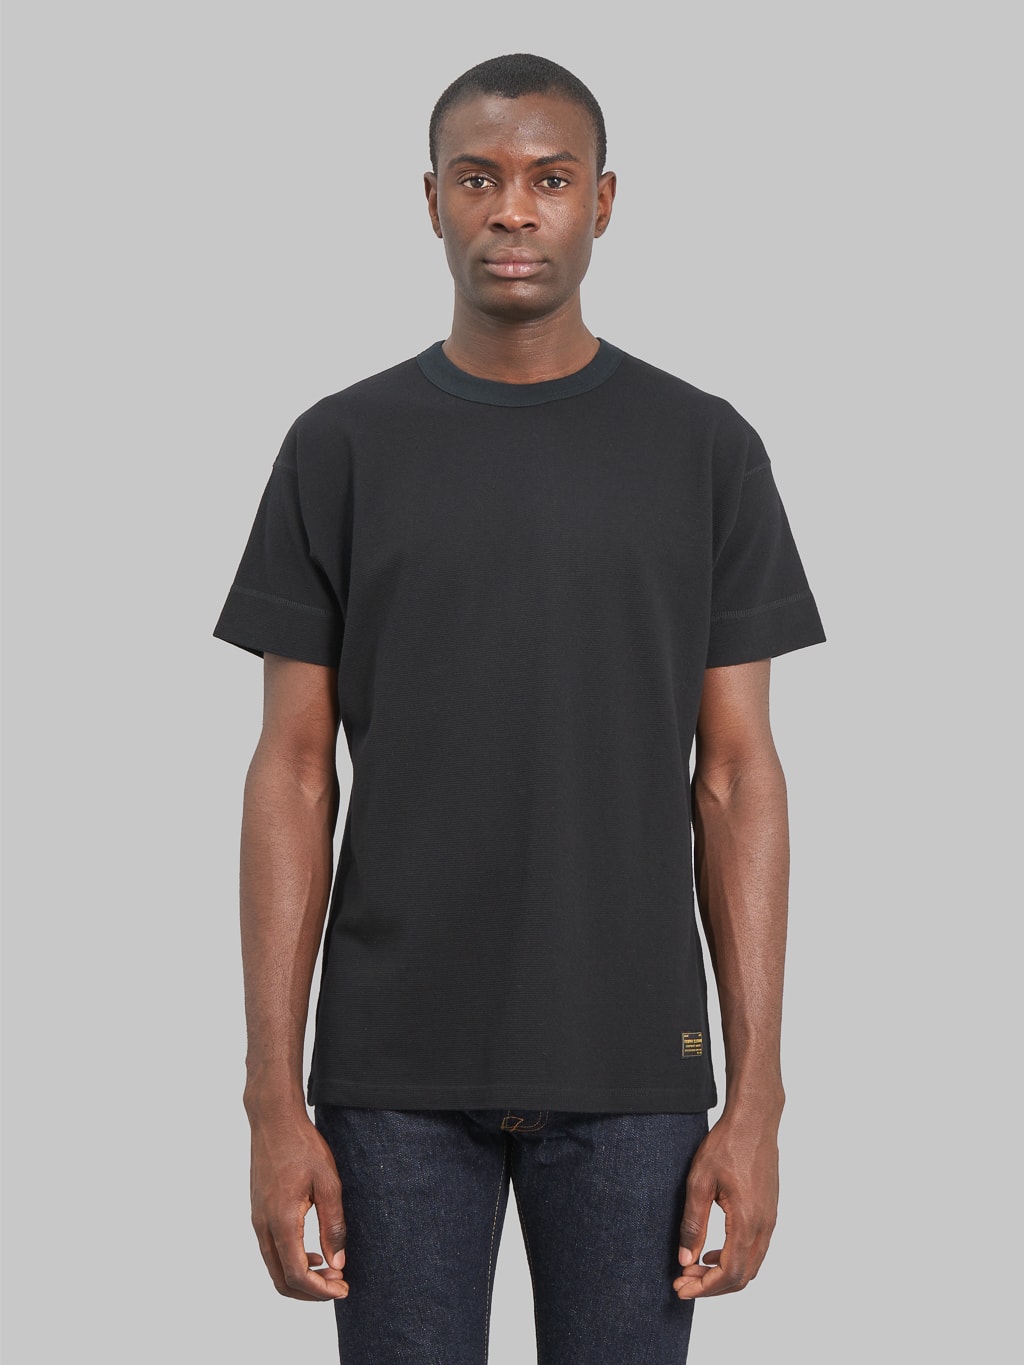 Trophy Clothing Utility Mil Tee black model front fit